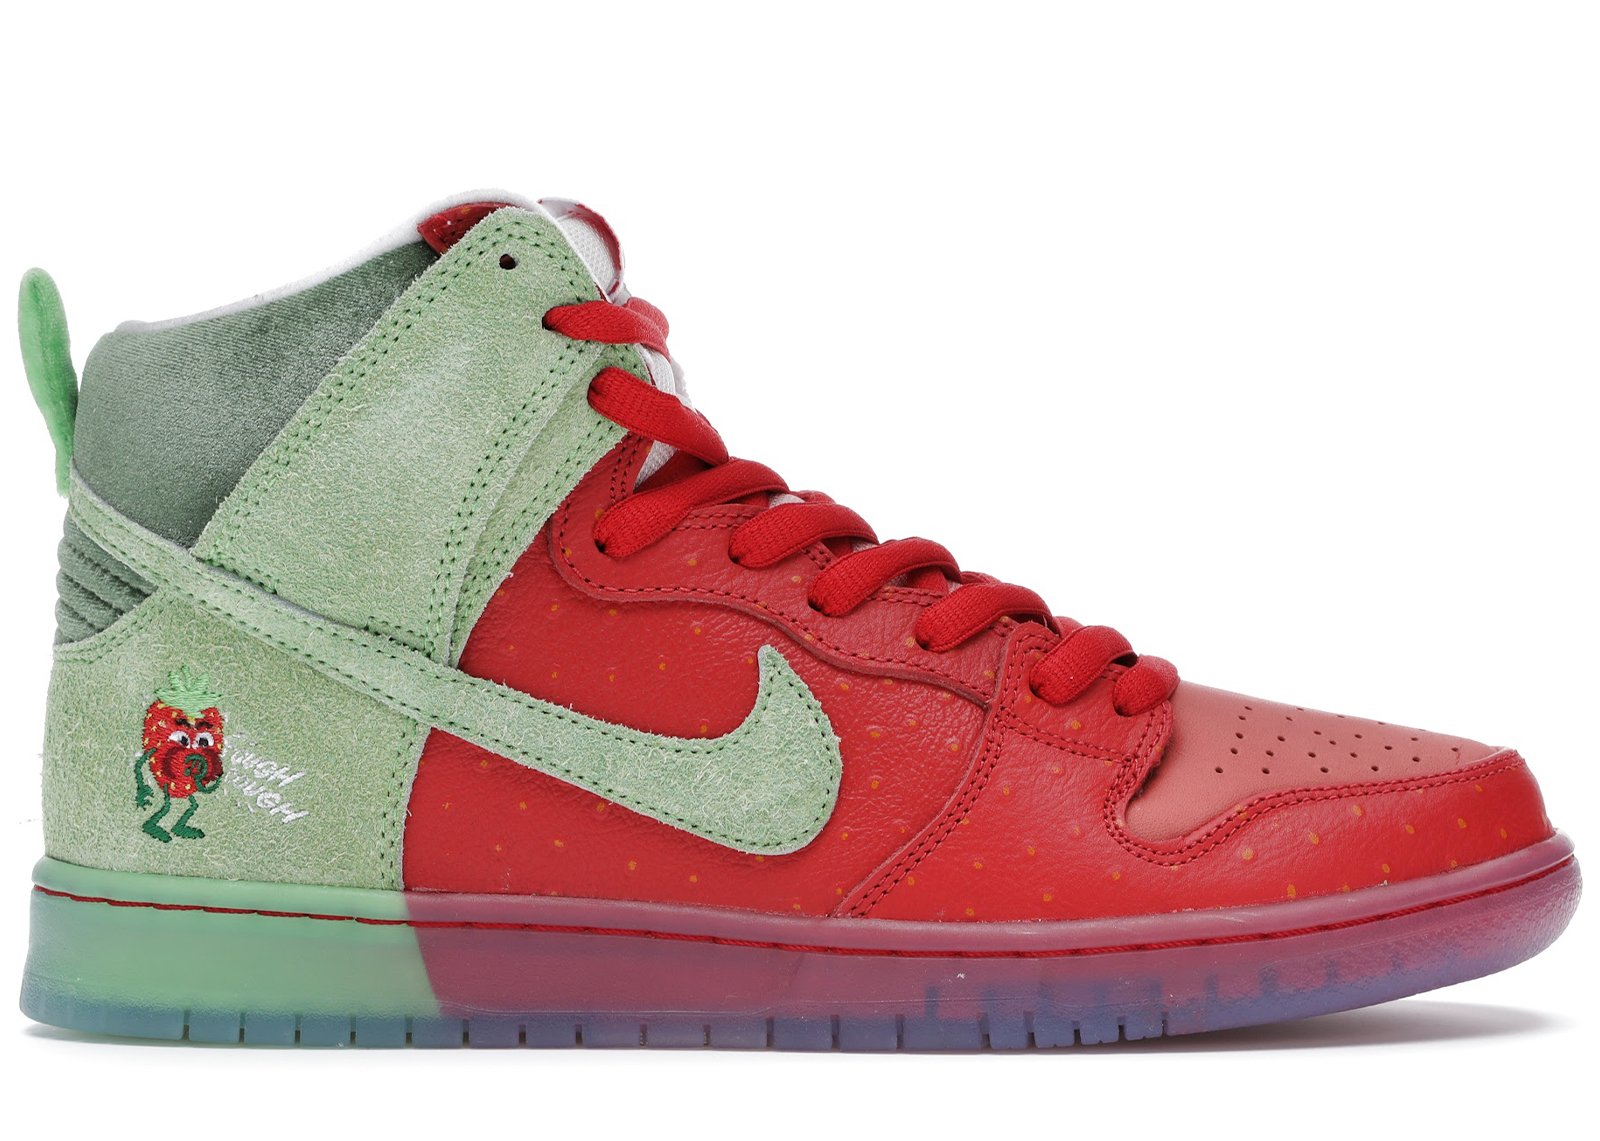 Nike SB Dunk High Strawberry Cough sneakers